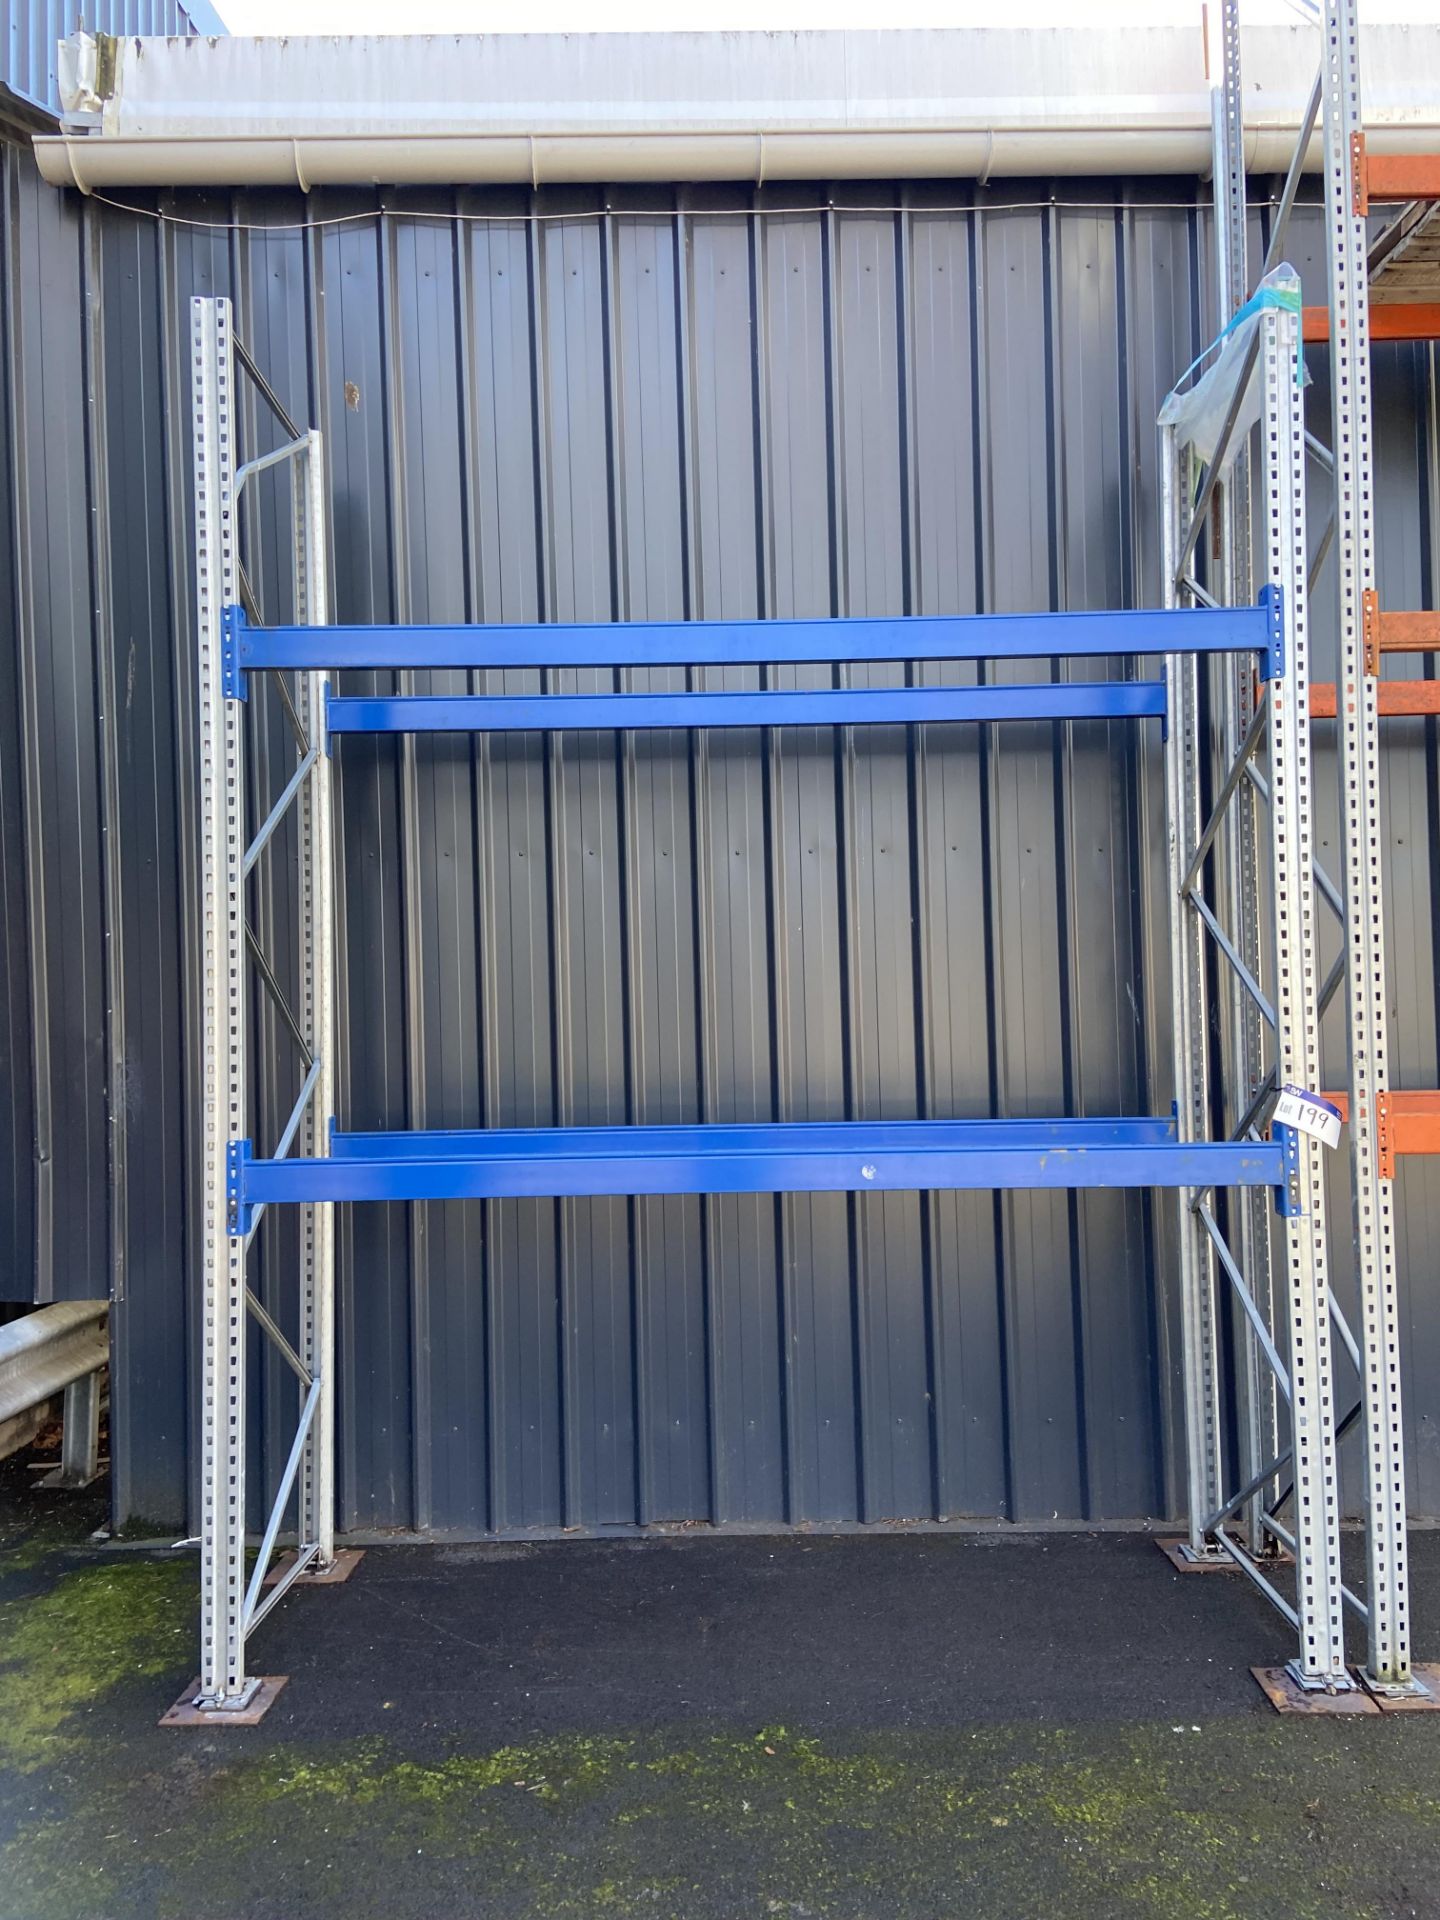 Bito Galvanised Steel Framed Single Bay Two Tier Pallet Rack, approx. 900mm x 3.6m highPlease read